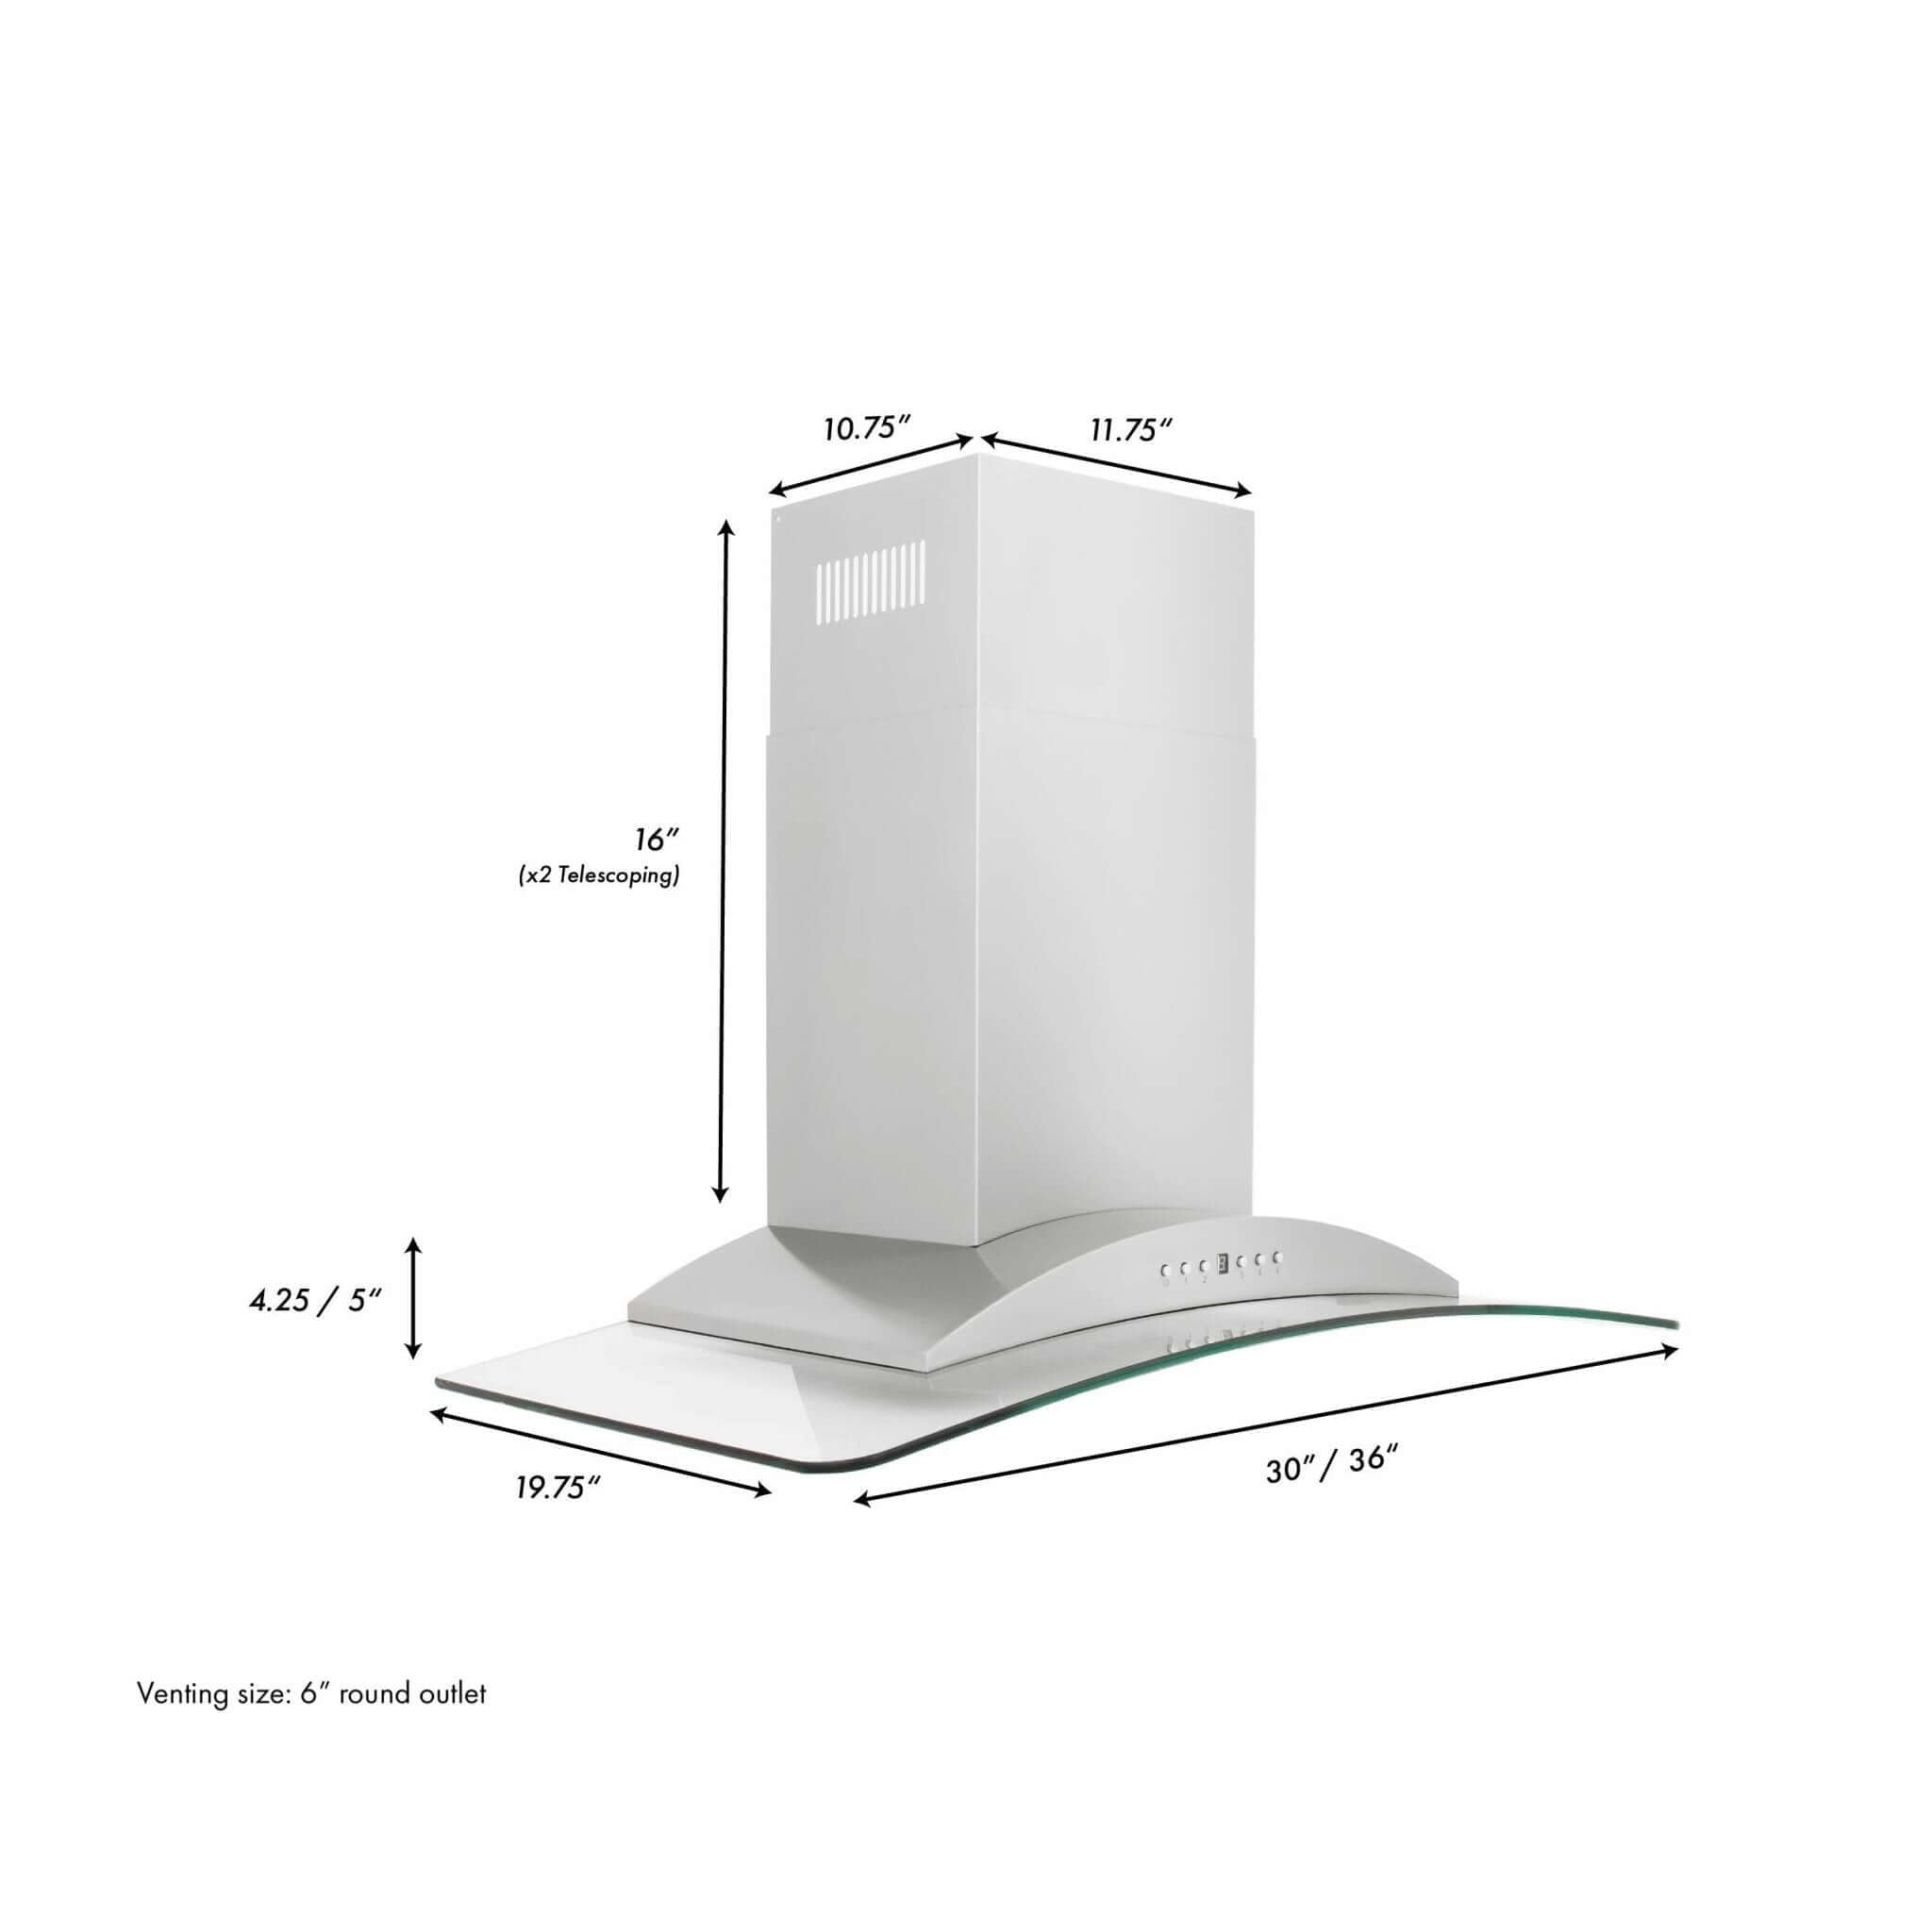 ZLINE Convertible Vent Wall Mount Range Hood in Stainless Steel & Glass (KN) dimensions.